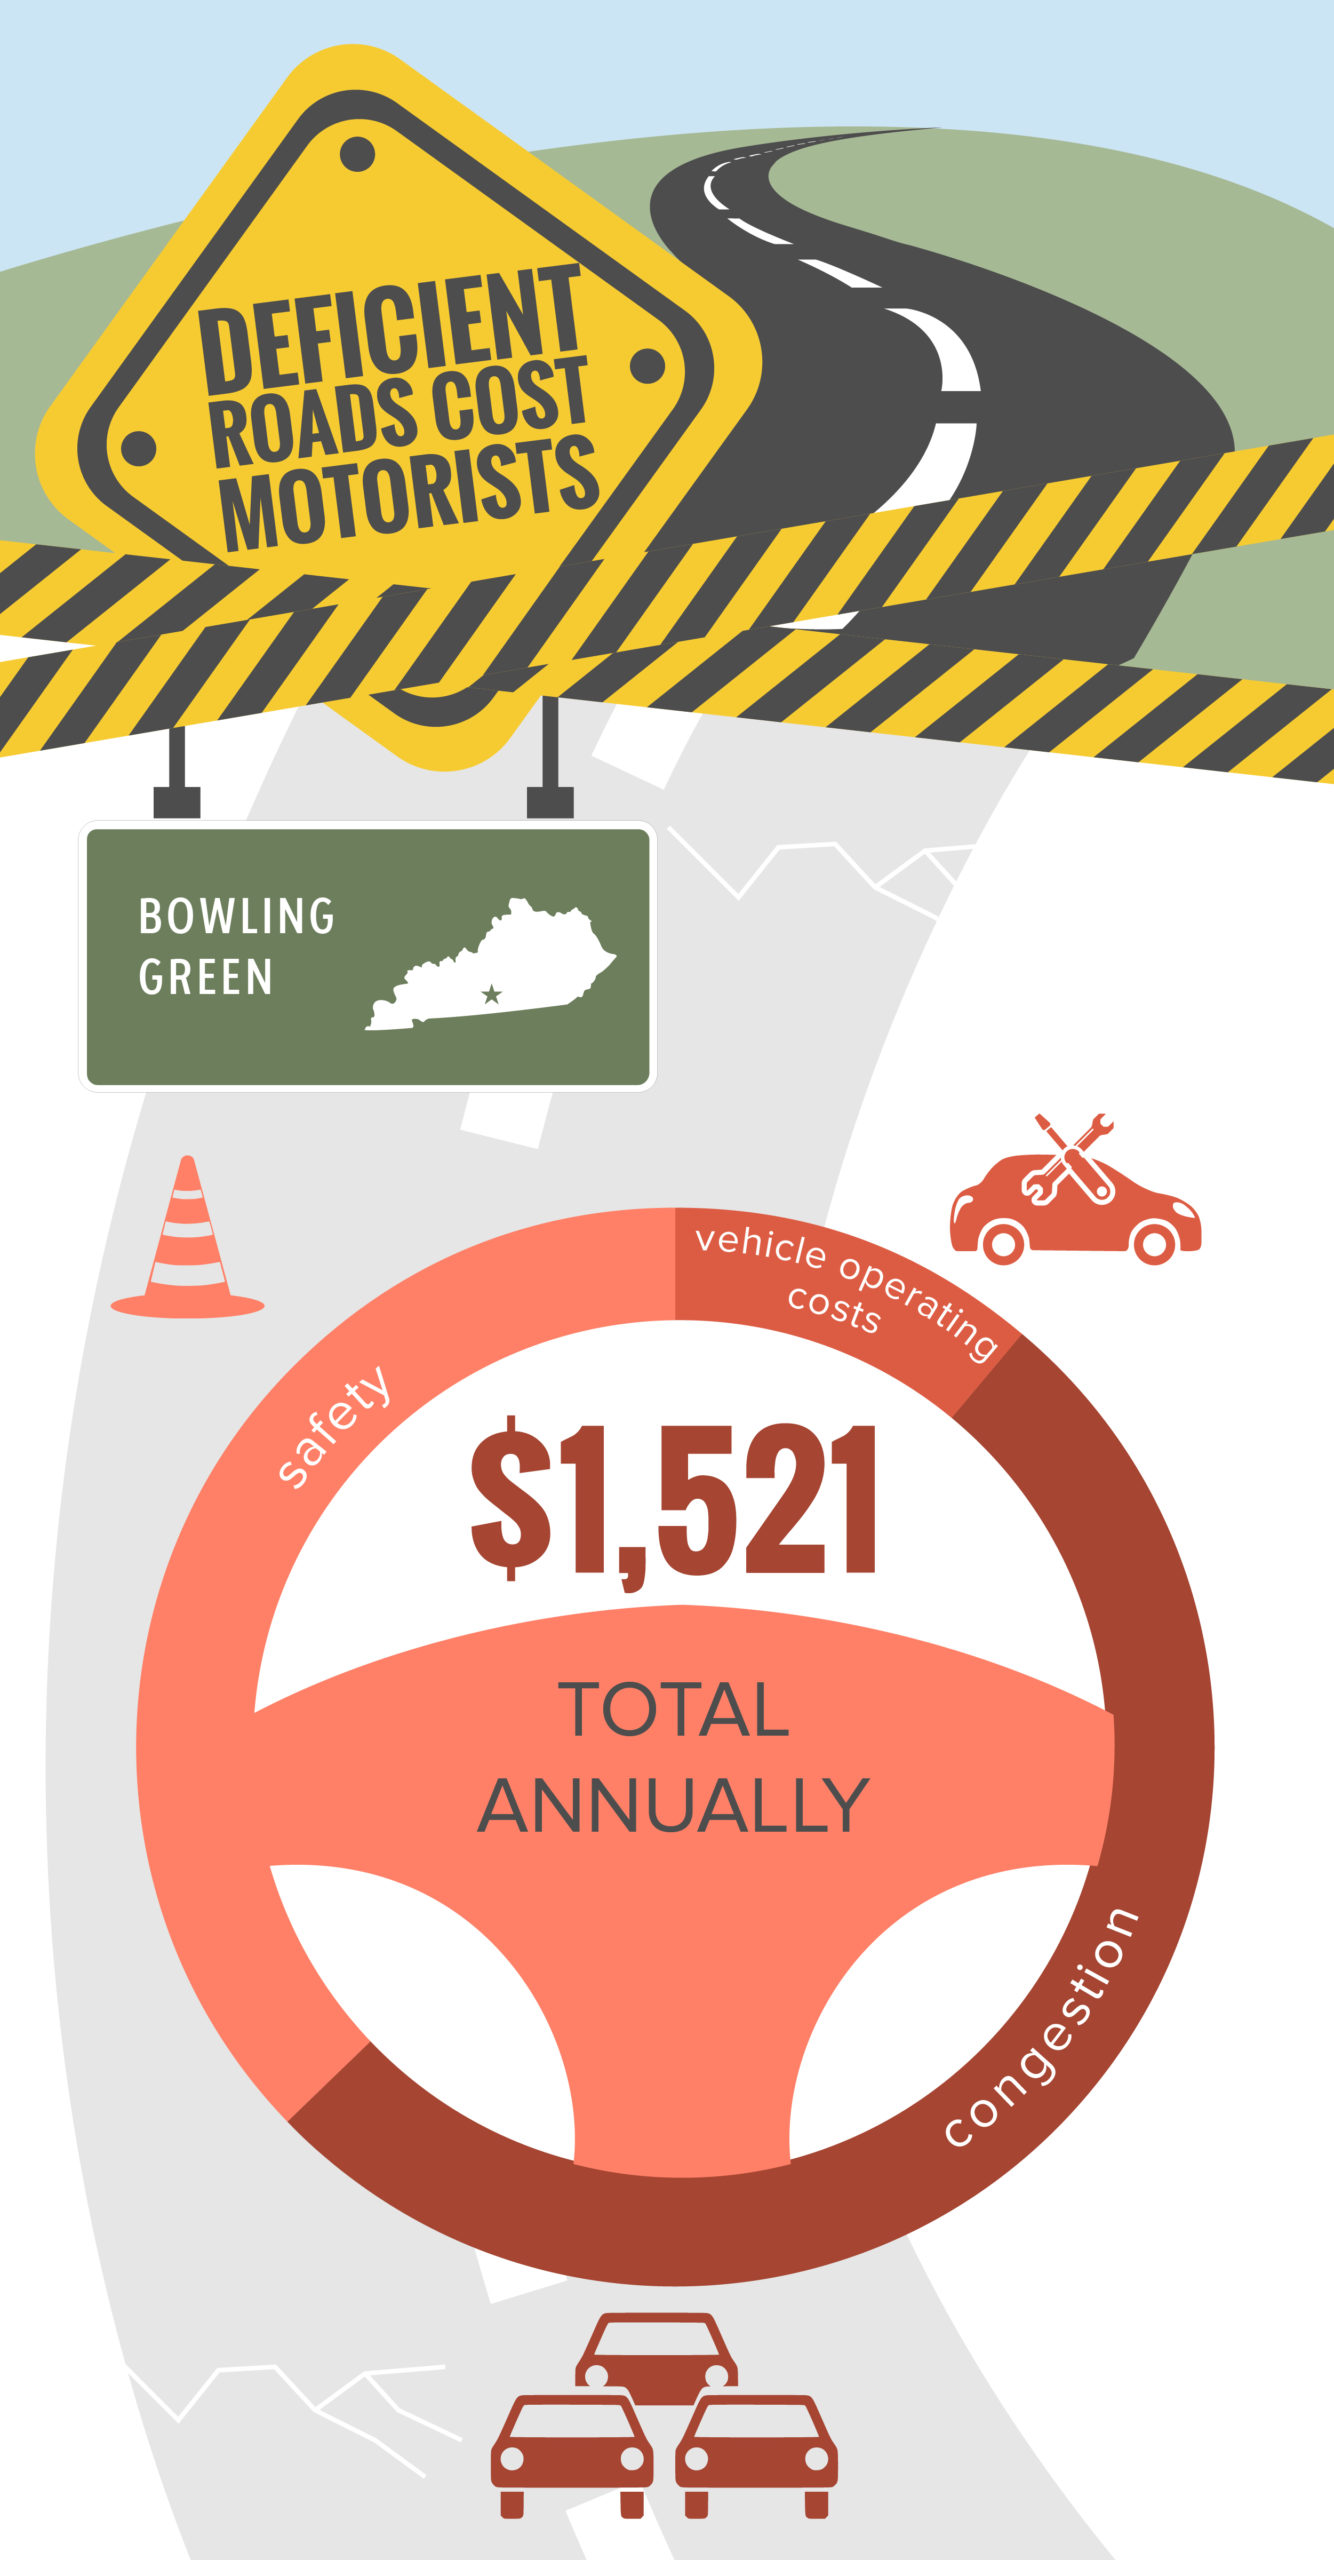 Bowling Green Deficient Roads Cost to Motorists Infographic – February 2022